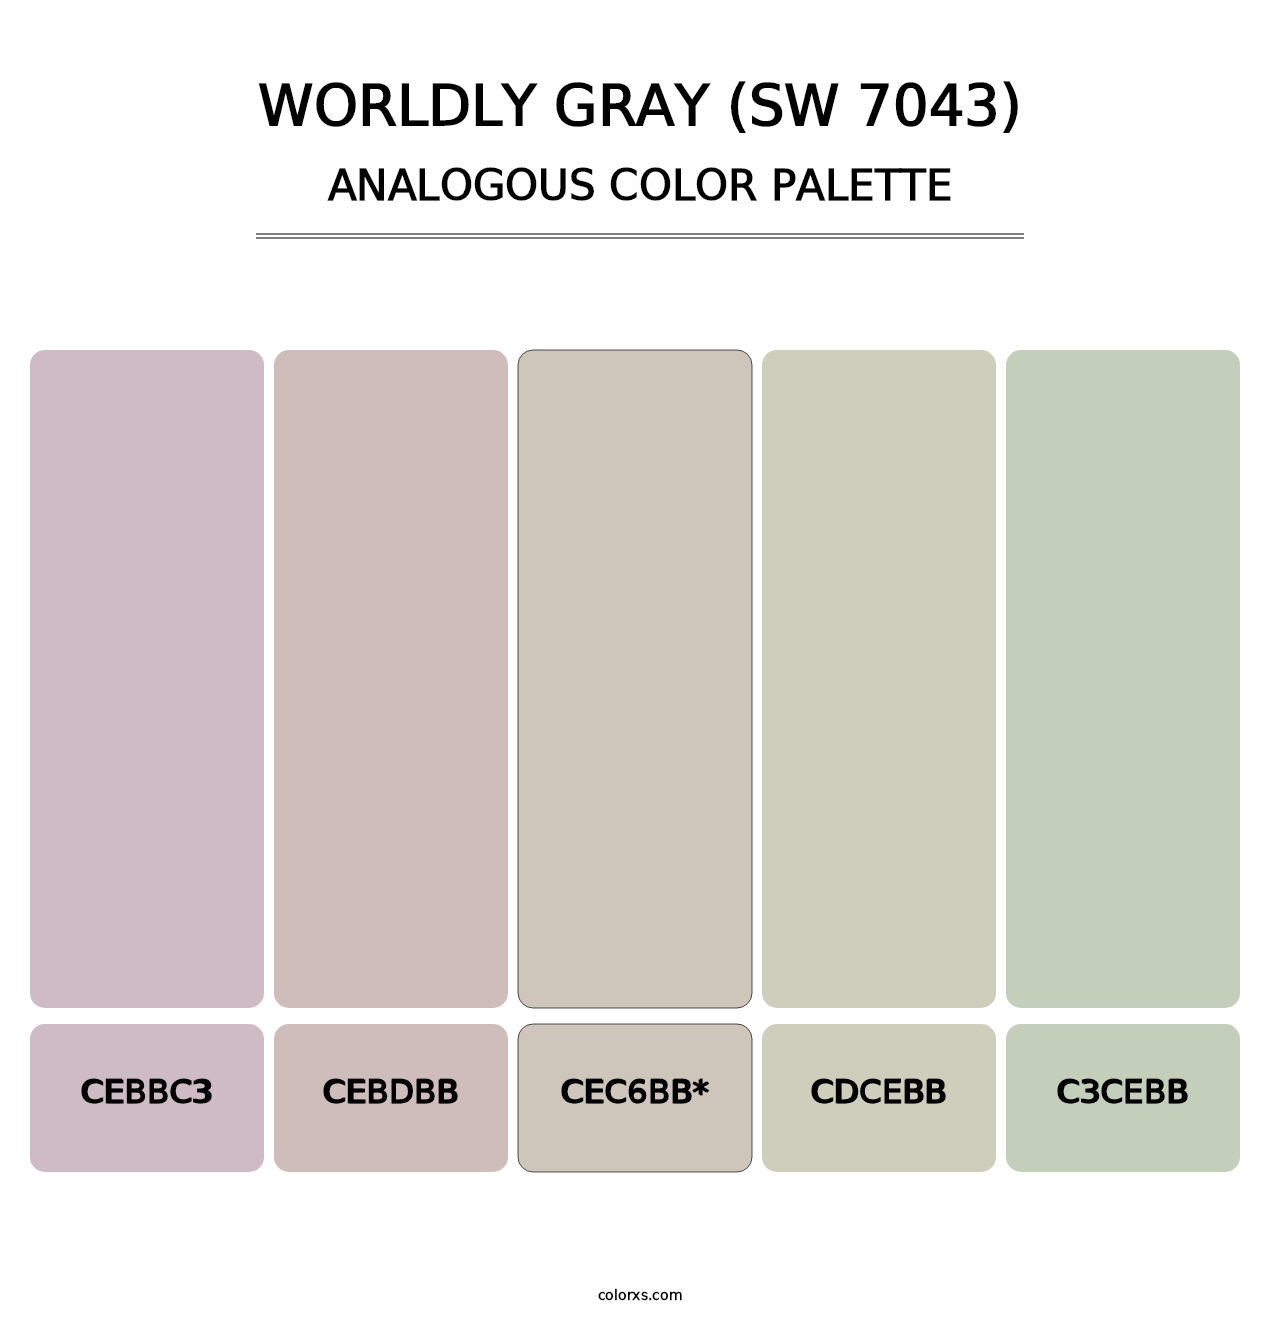 Worldly Gray (SW 7043) - Analogous Color Palette